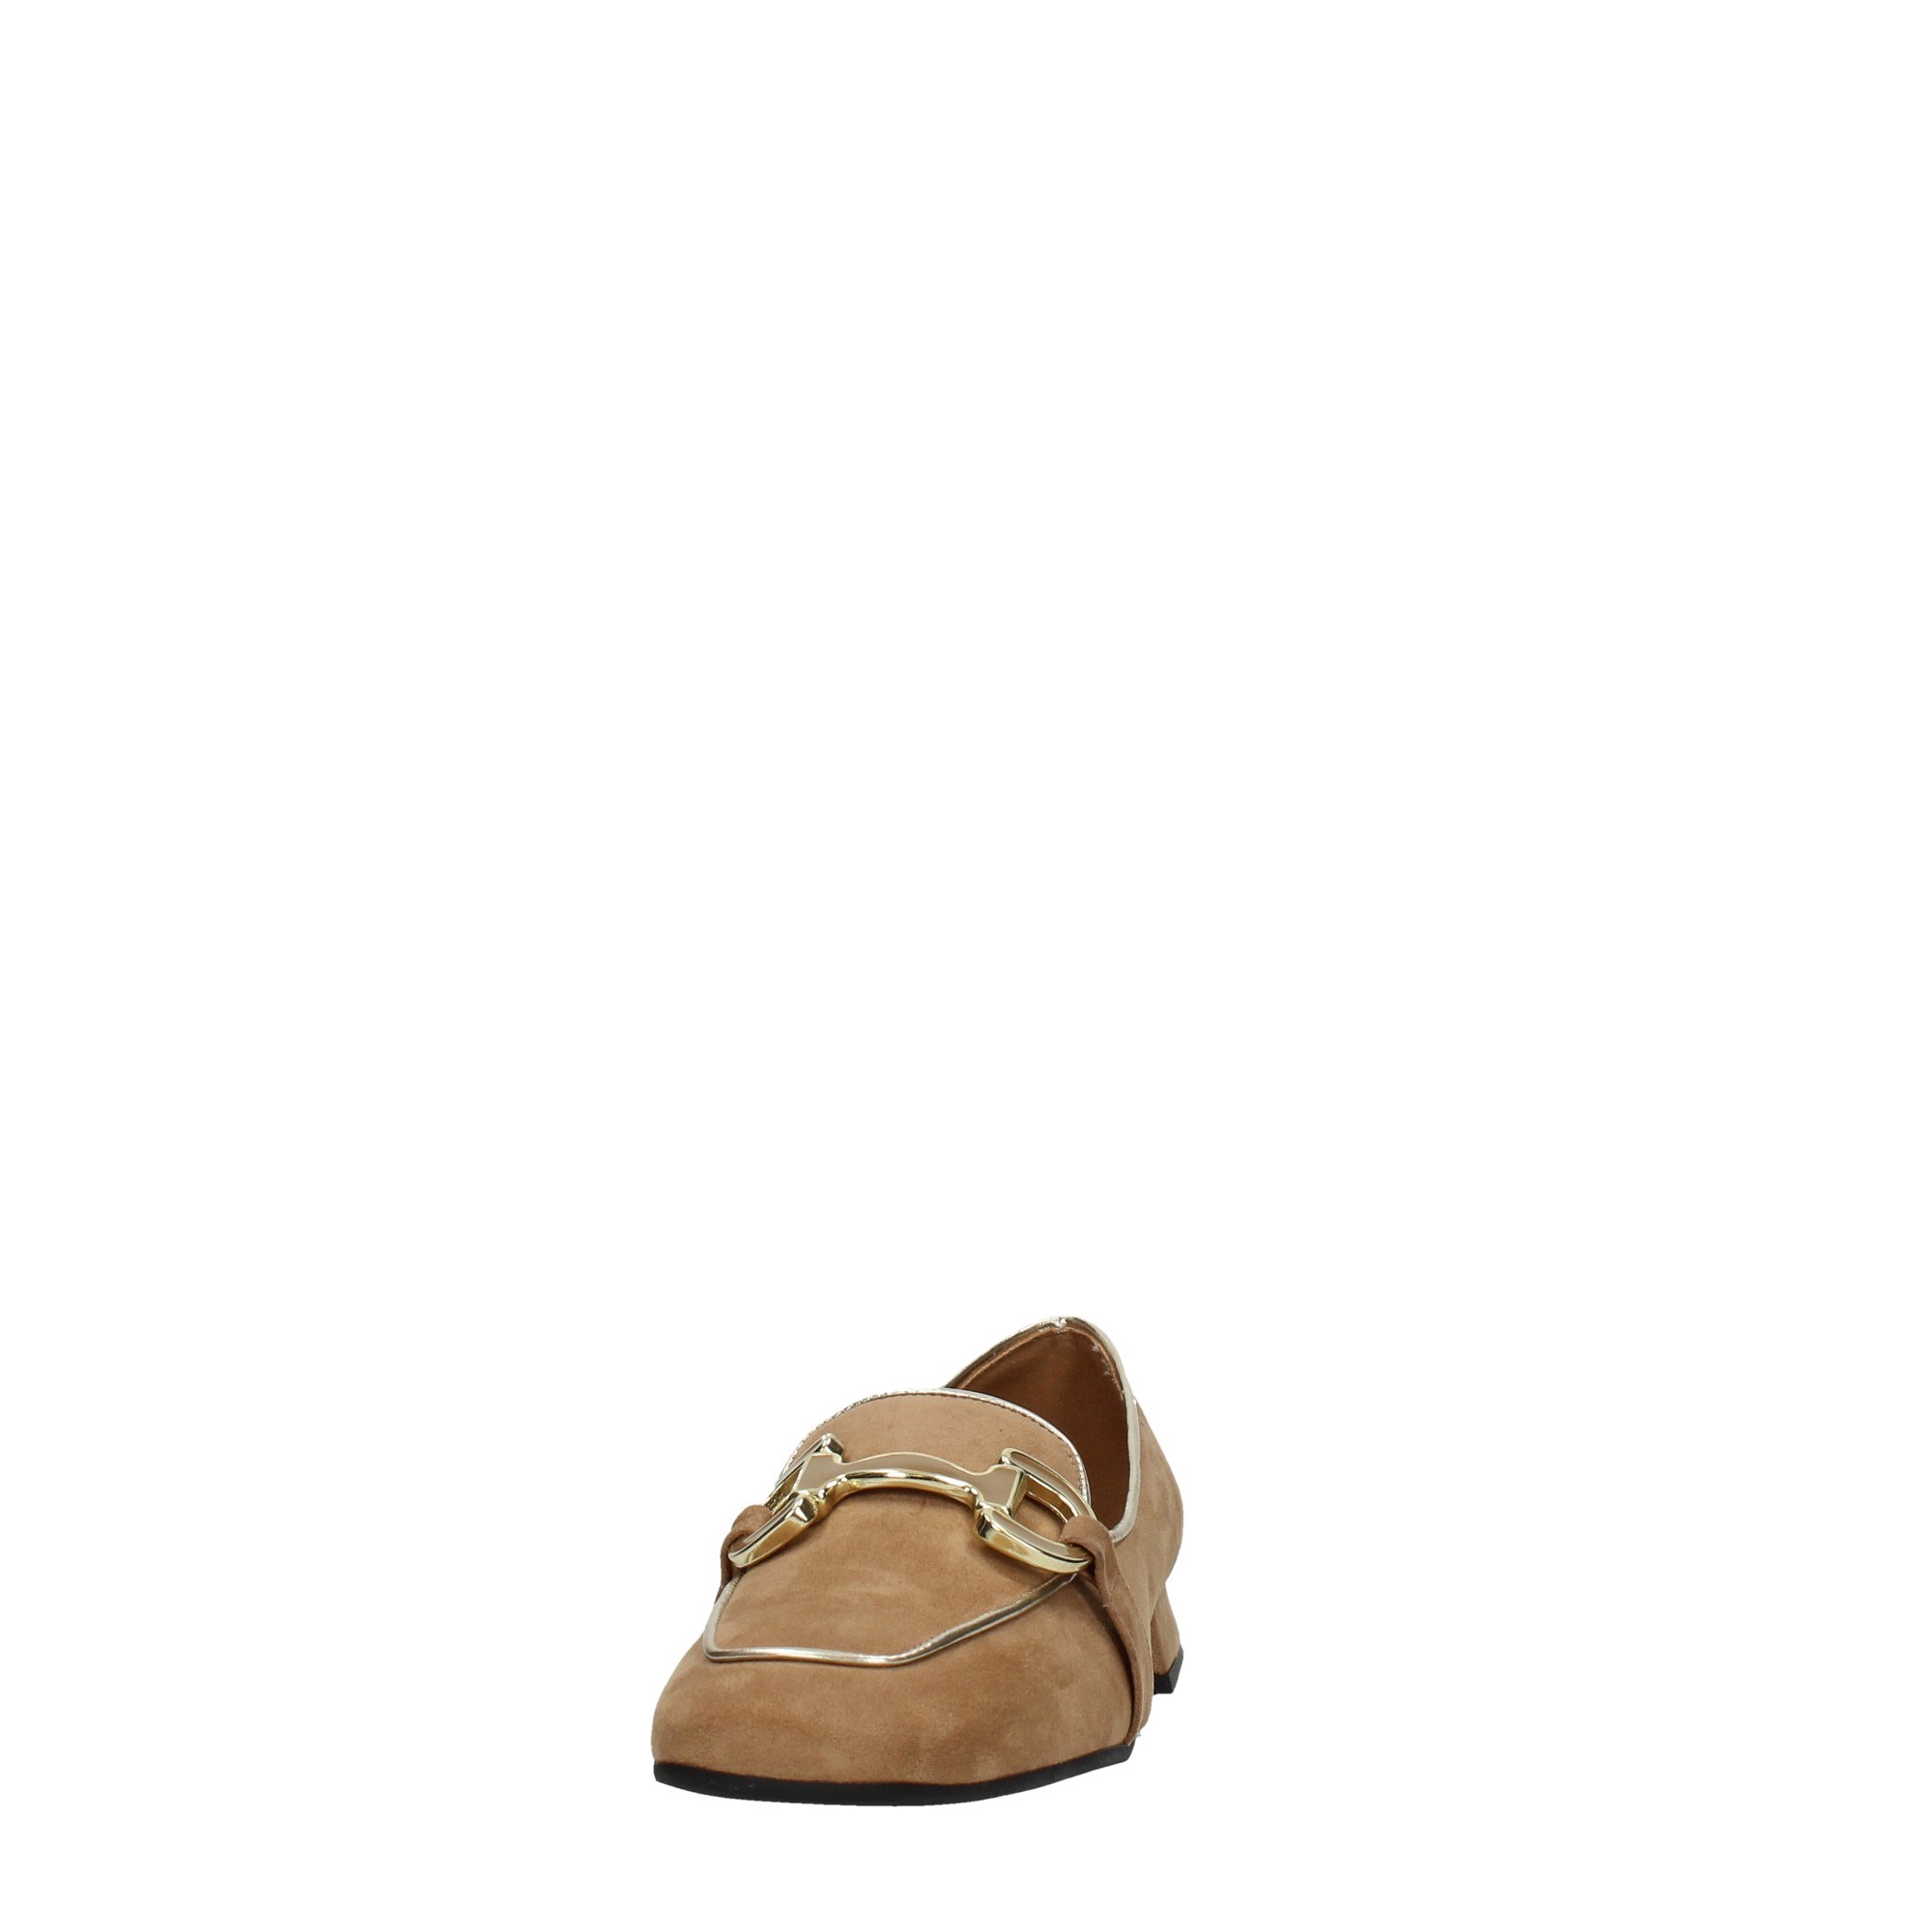 Attisure Shoes Women Moccasins And Slippers 20040